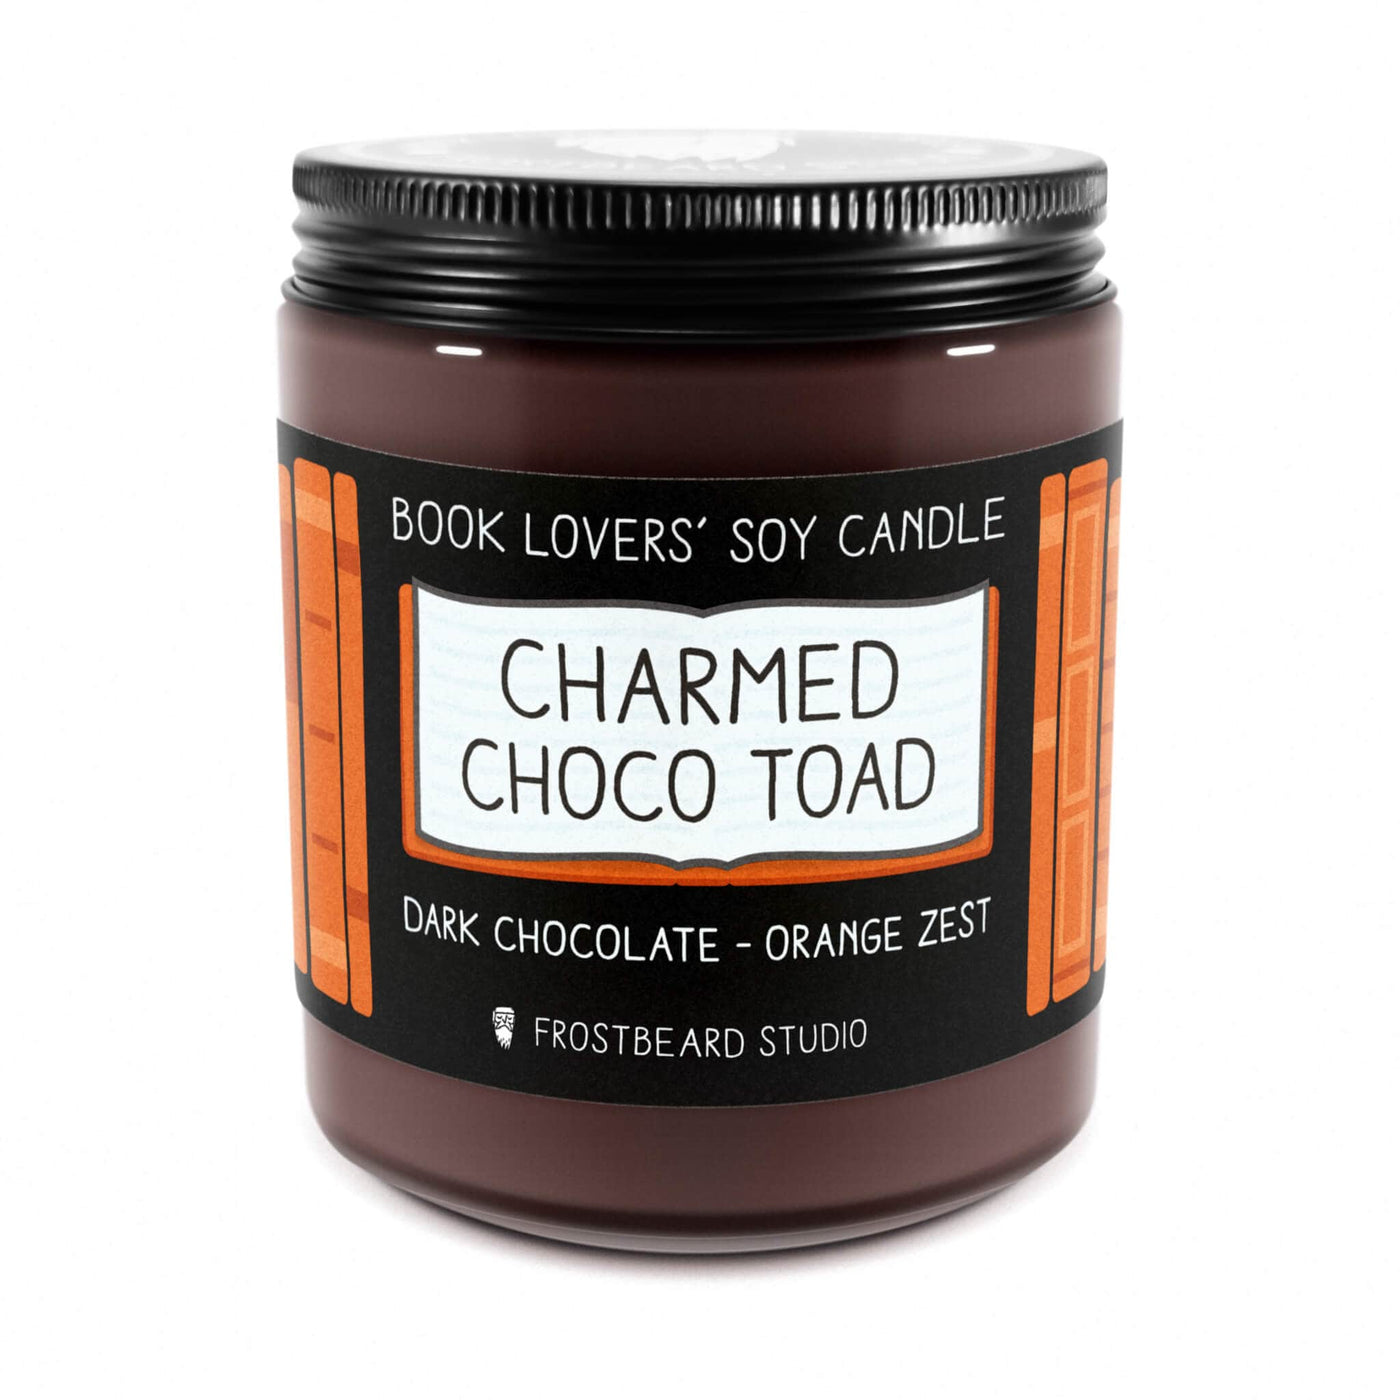 Charmed Choco Toad  -  8 oz Jar  -  Book Lovers' Soy Candle  -  Frostbeard Studio